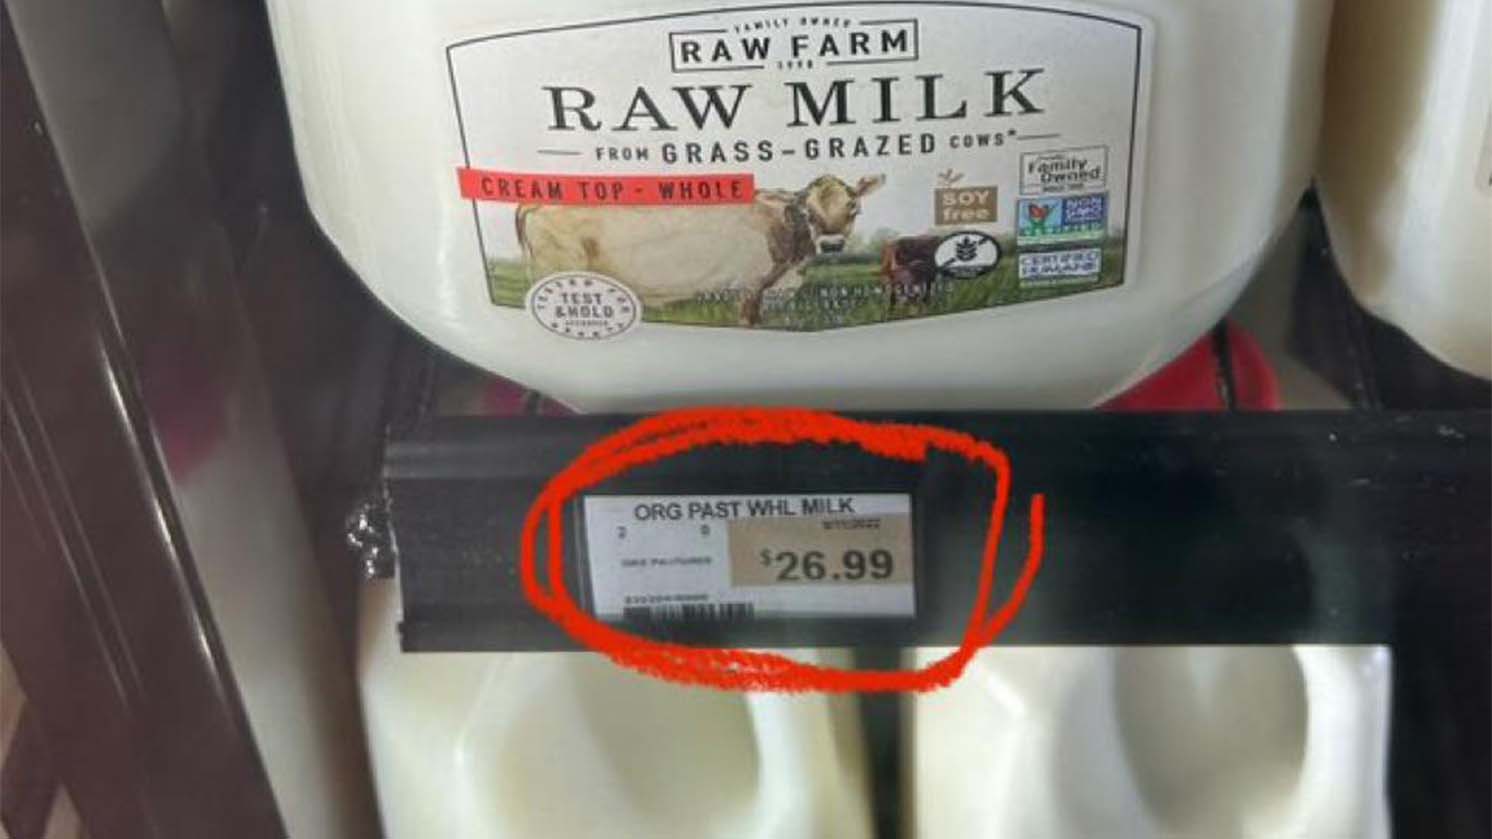 Why is raw milk so expensive?